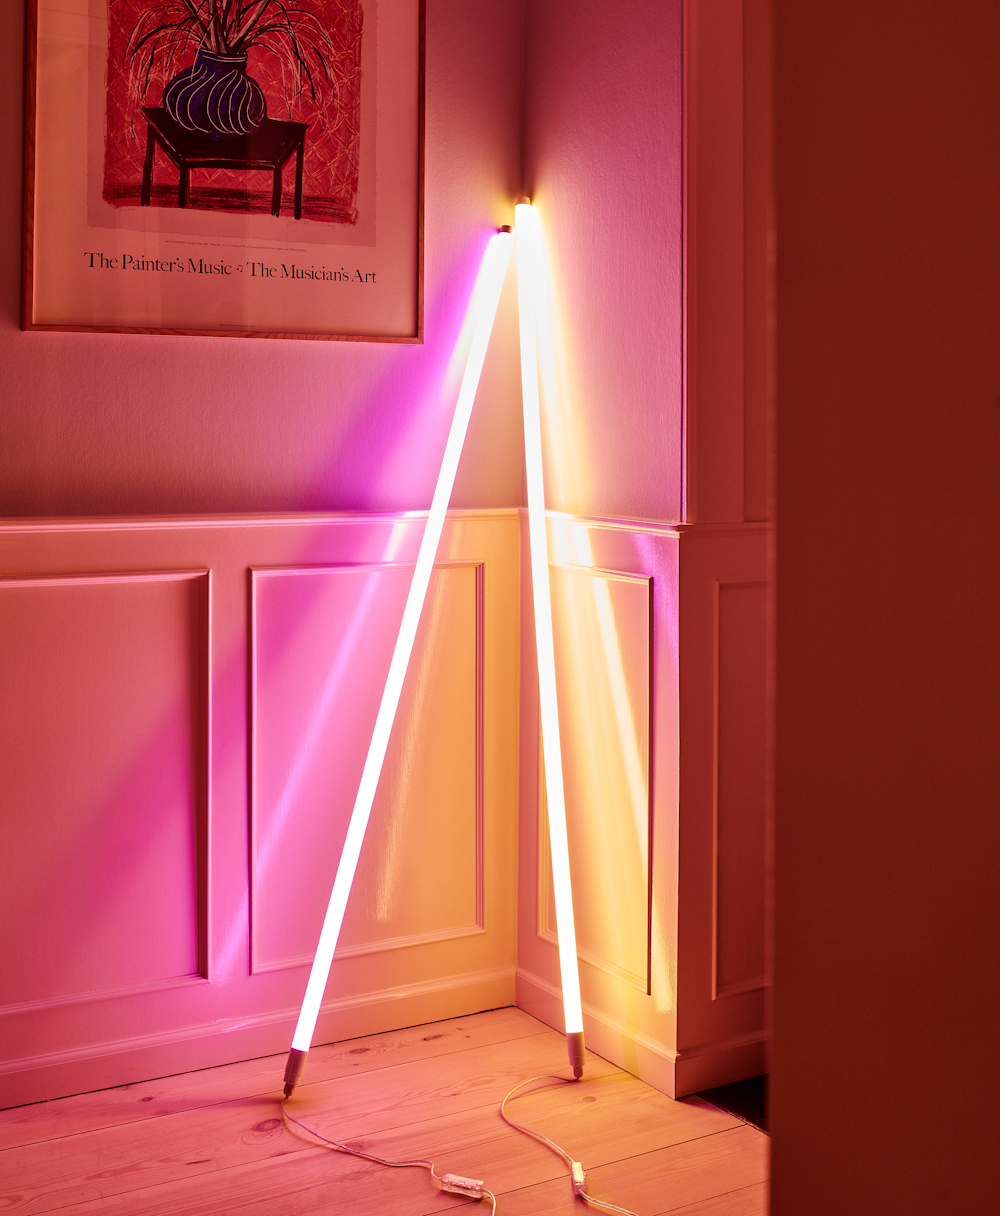 Neon Tube LED Lights in a home setting